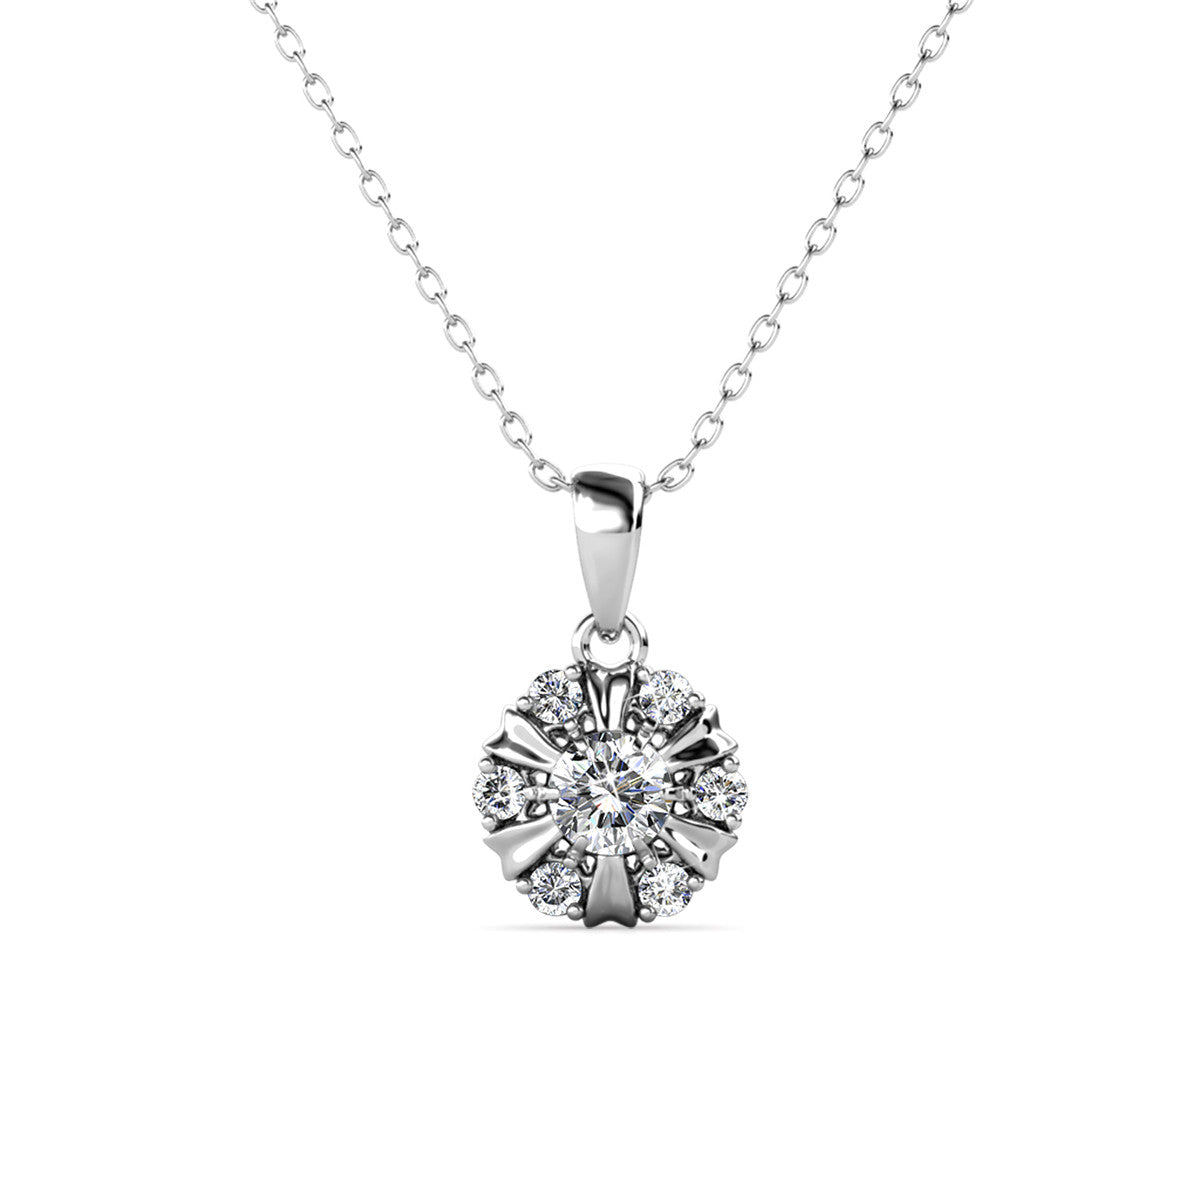 Millie 18k White Gold Plated Crystal Necklace